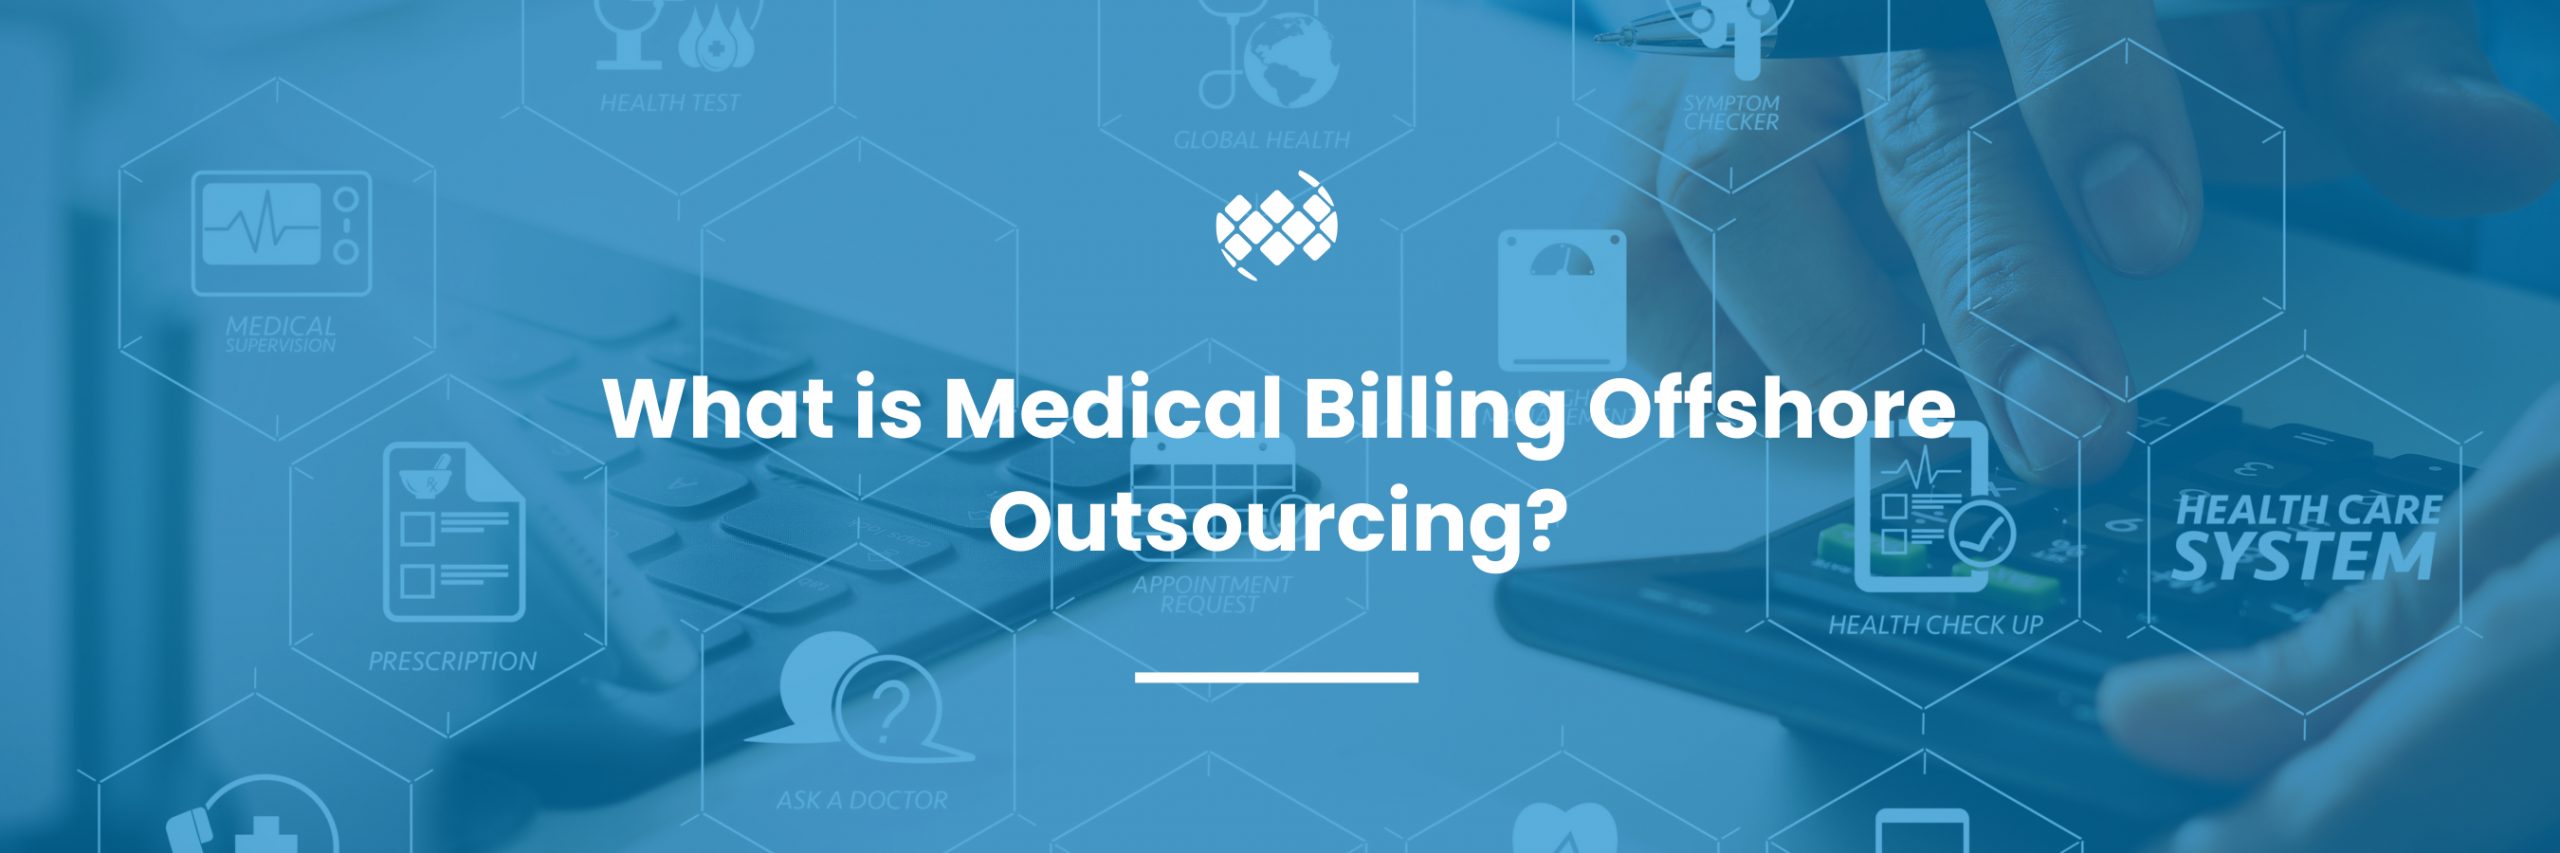 What is medical billing offshore outsourcing